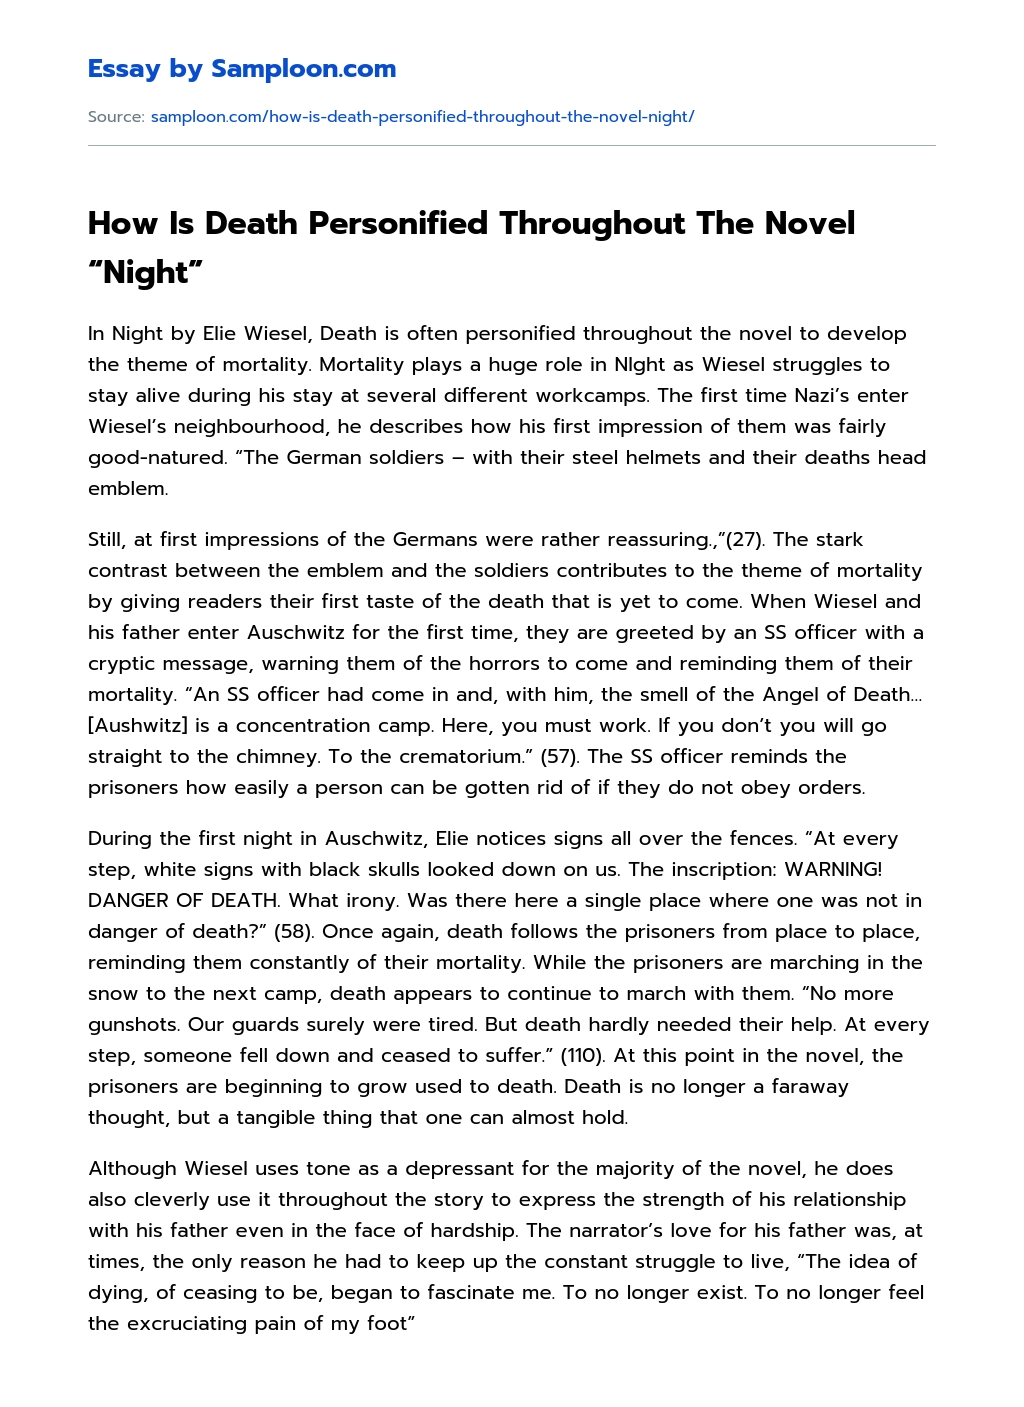 How Is Death Personified Throughout The Novel “Night” Summary essay